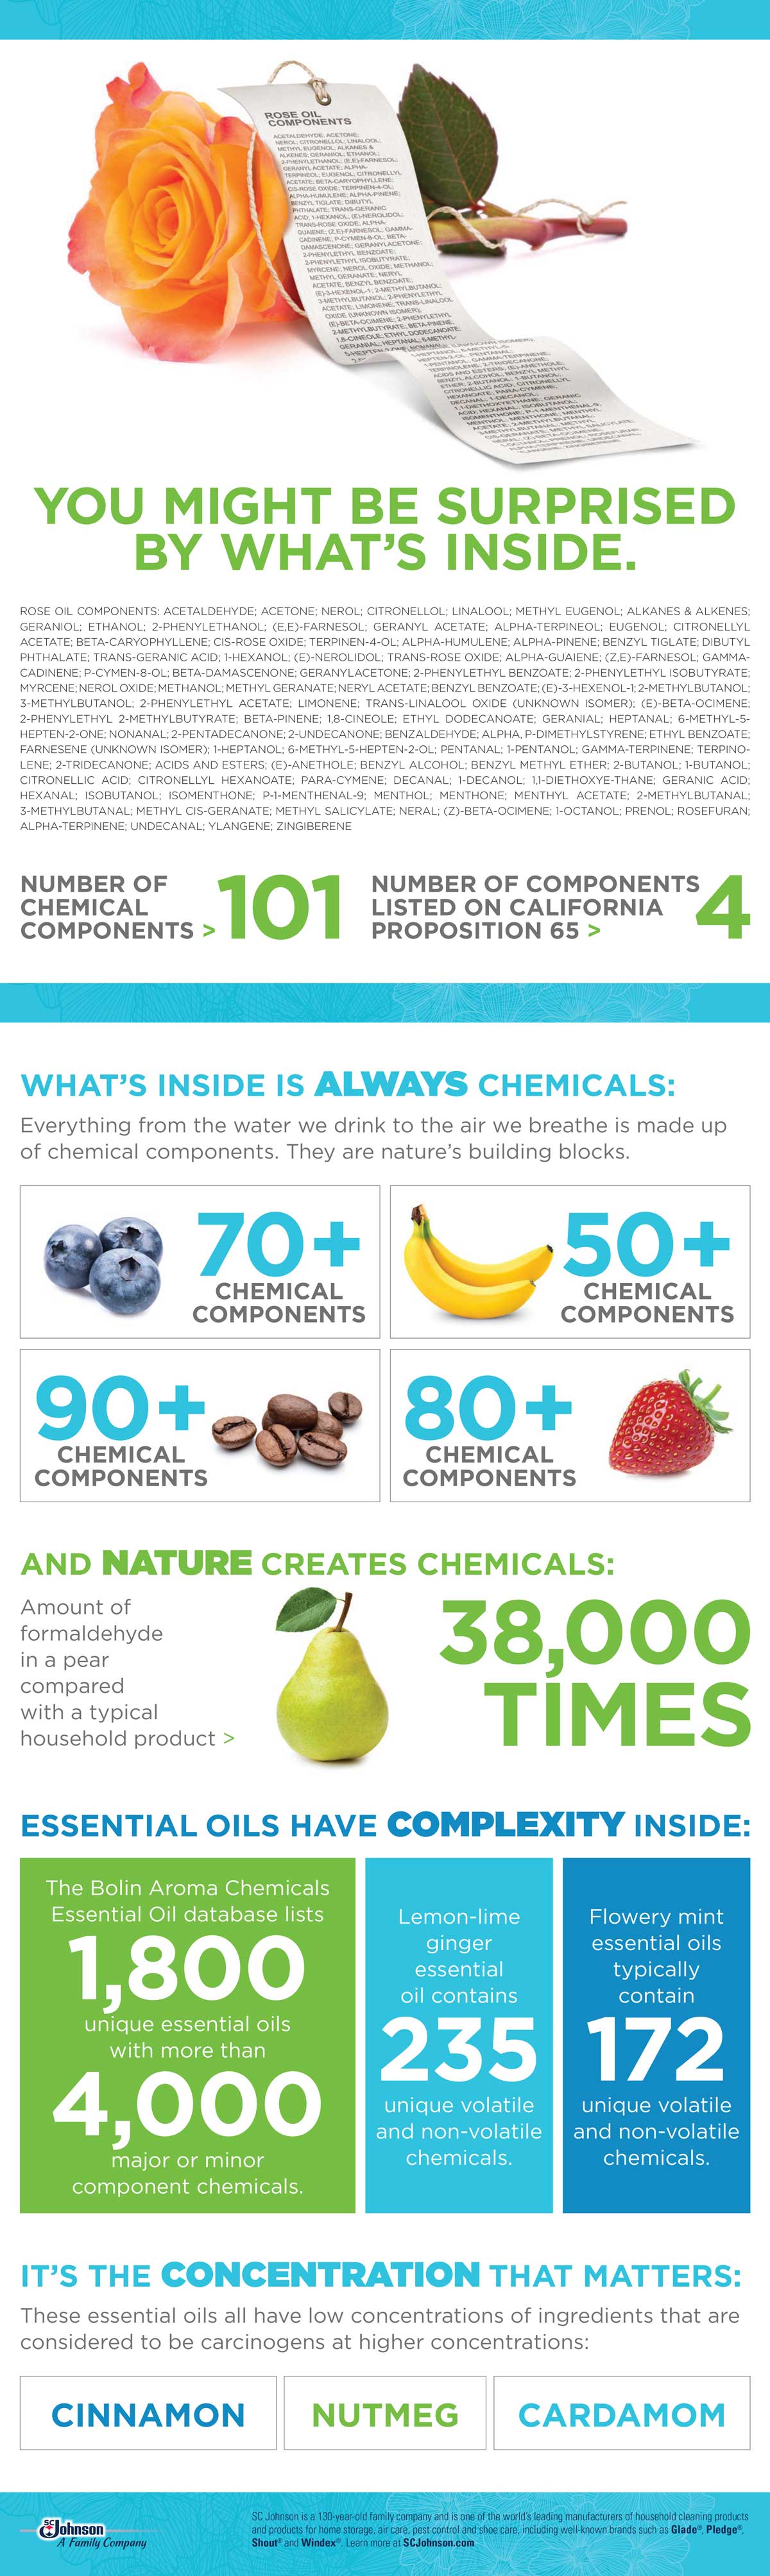 An ingredient transparency infographic from SC Johnson